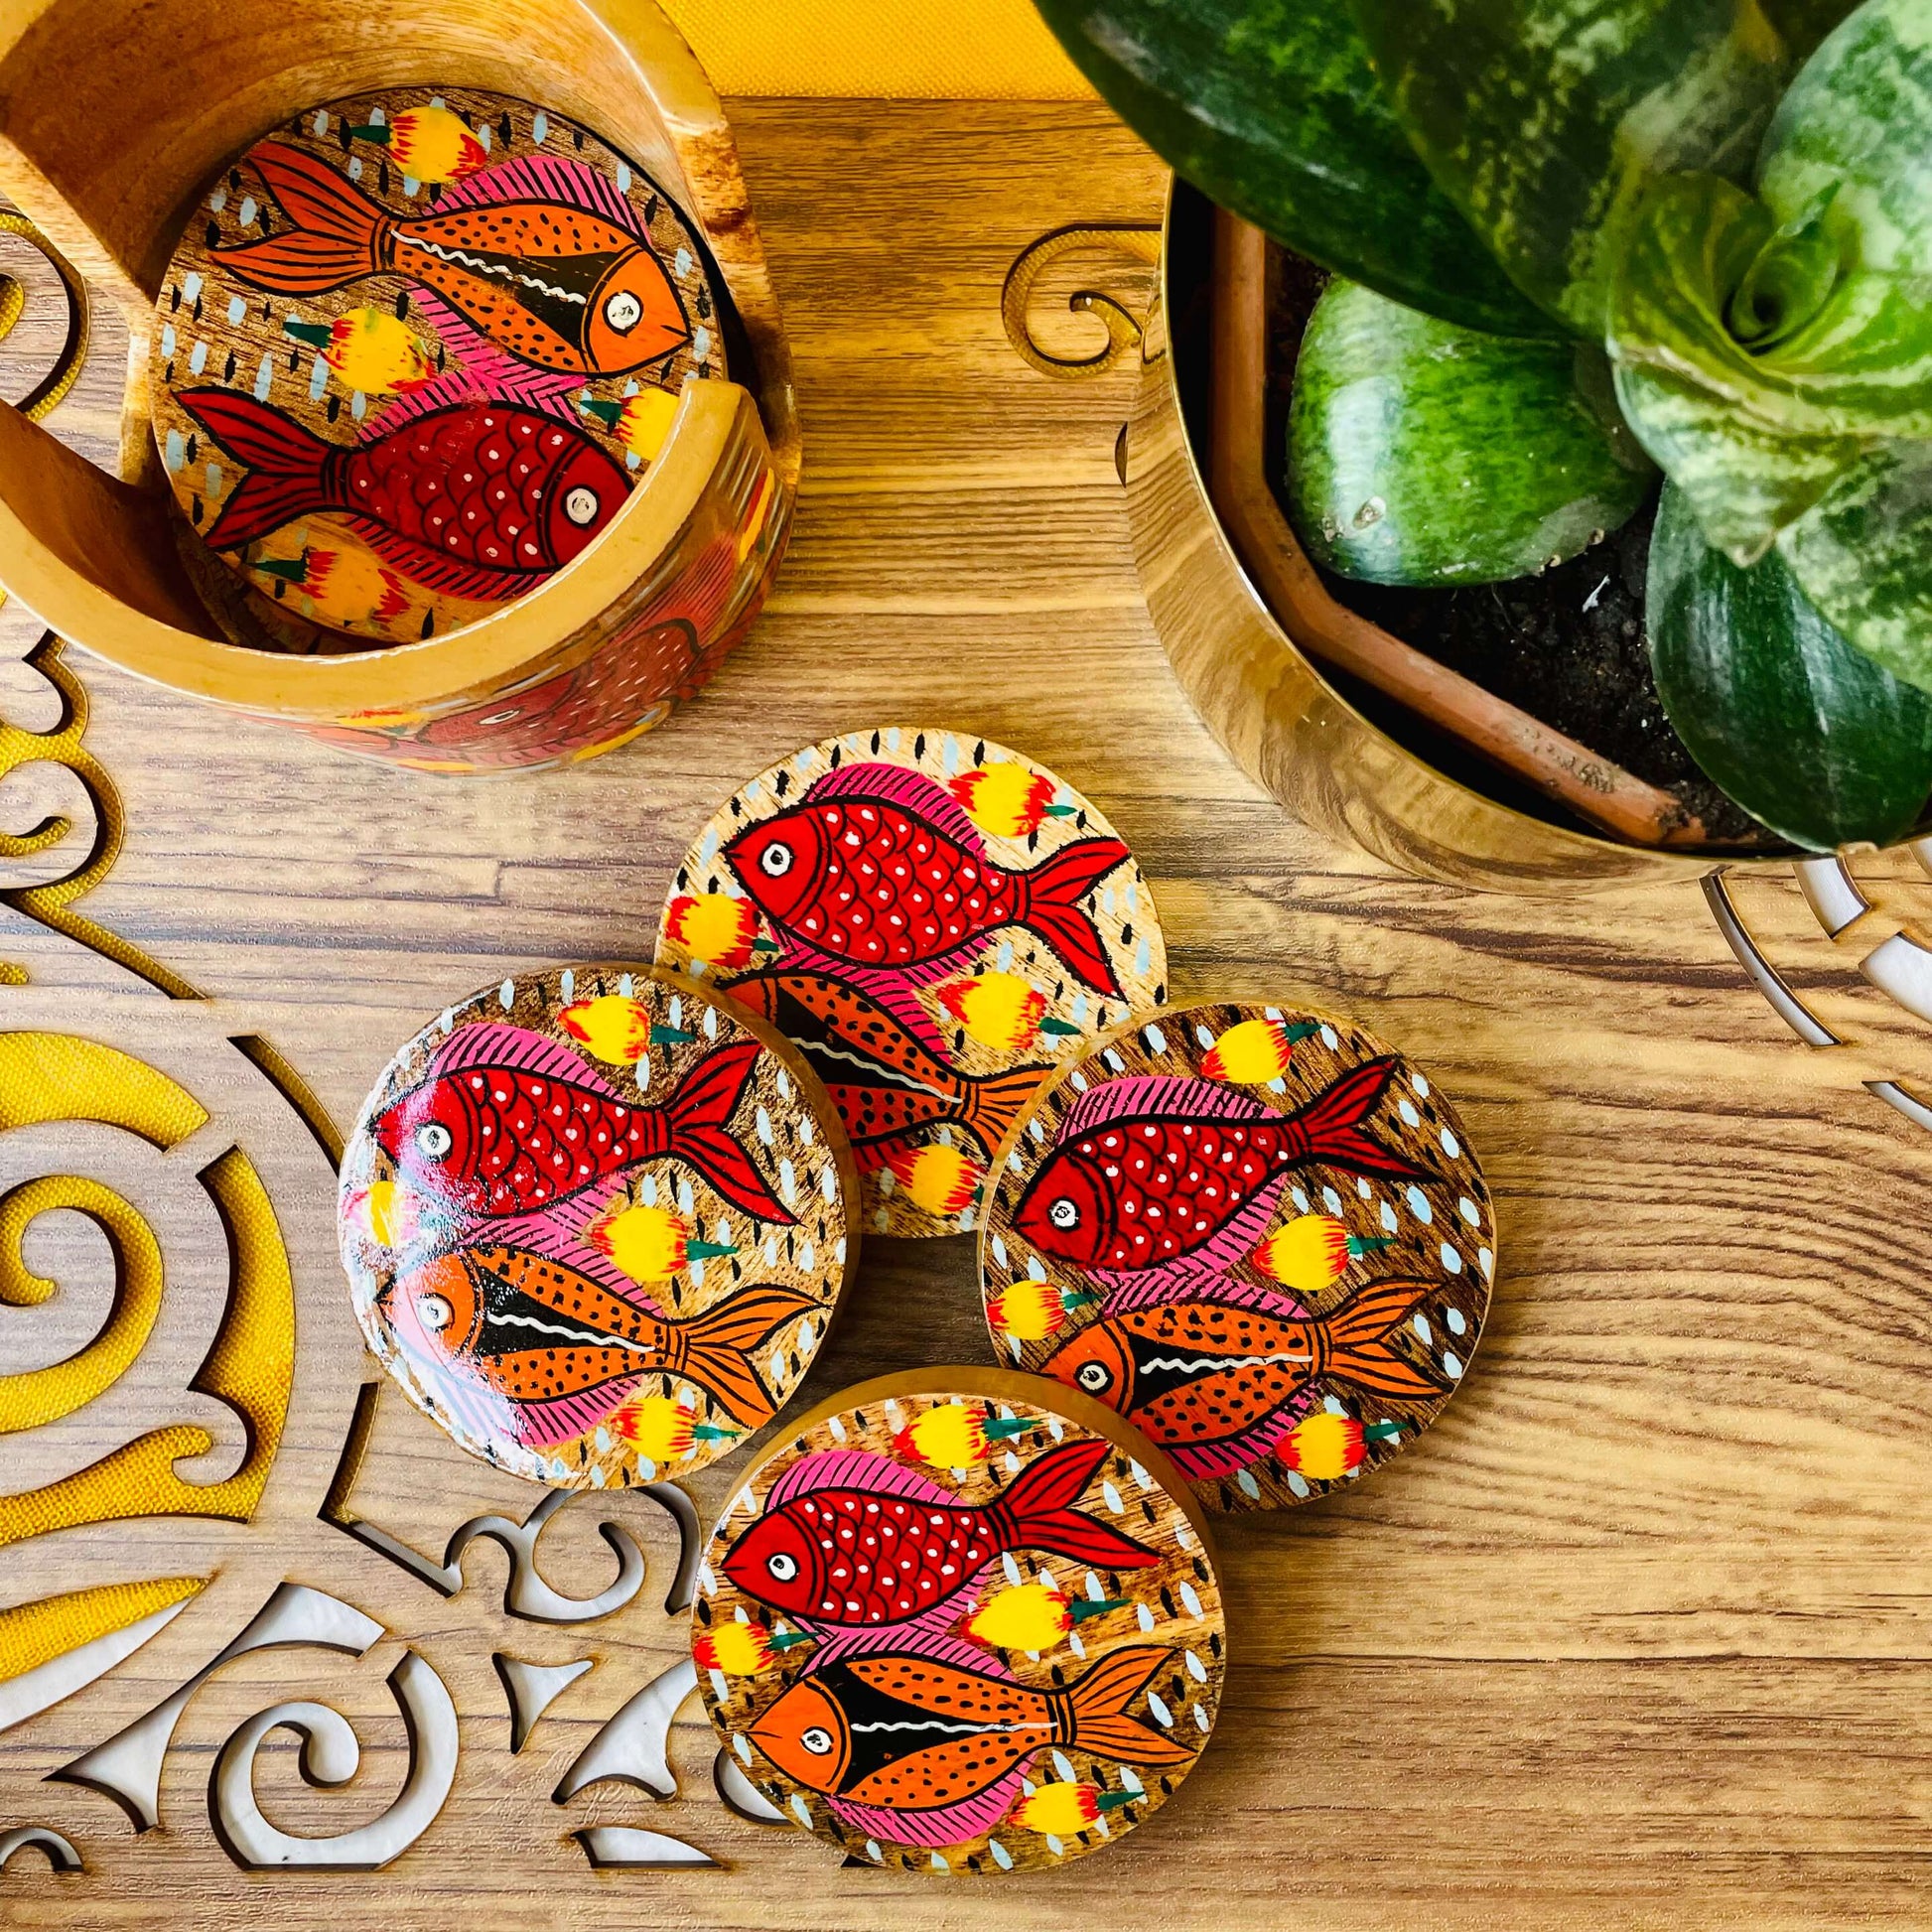 One pure mango wood round wooden coaster is placed in a wood coaster holder while 4 round wooden coasters hand-painted with red and orange fishes having pink and yellow fins are displayed near a flower pot.